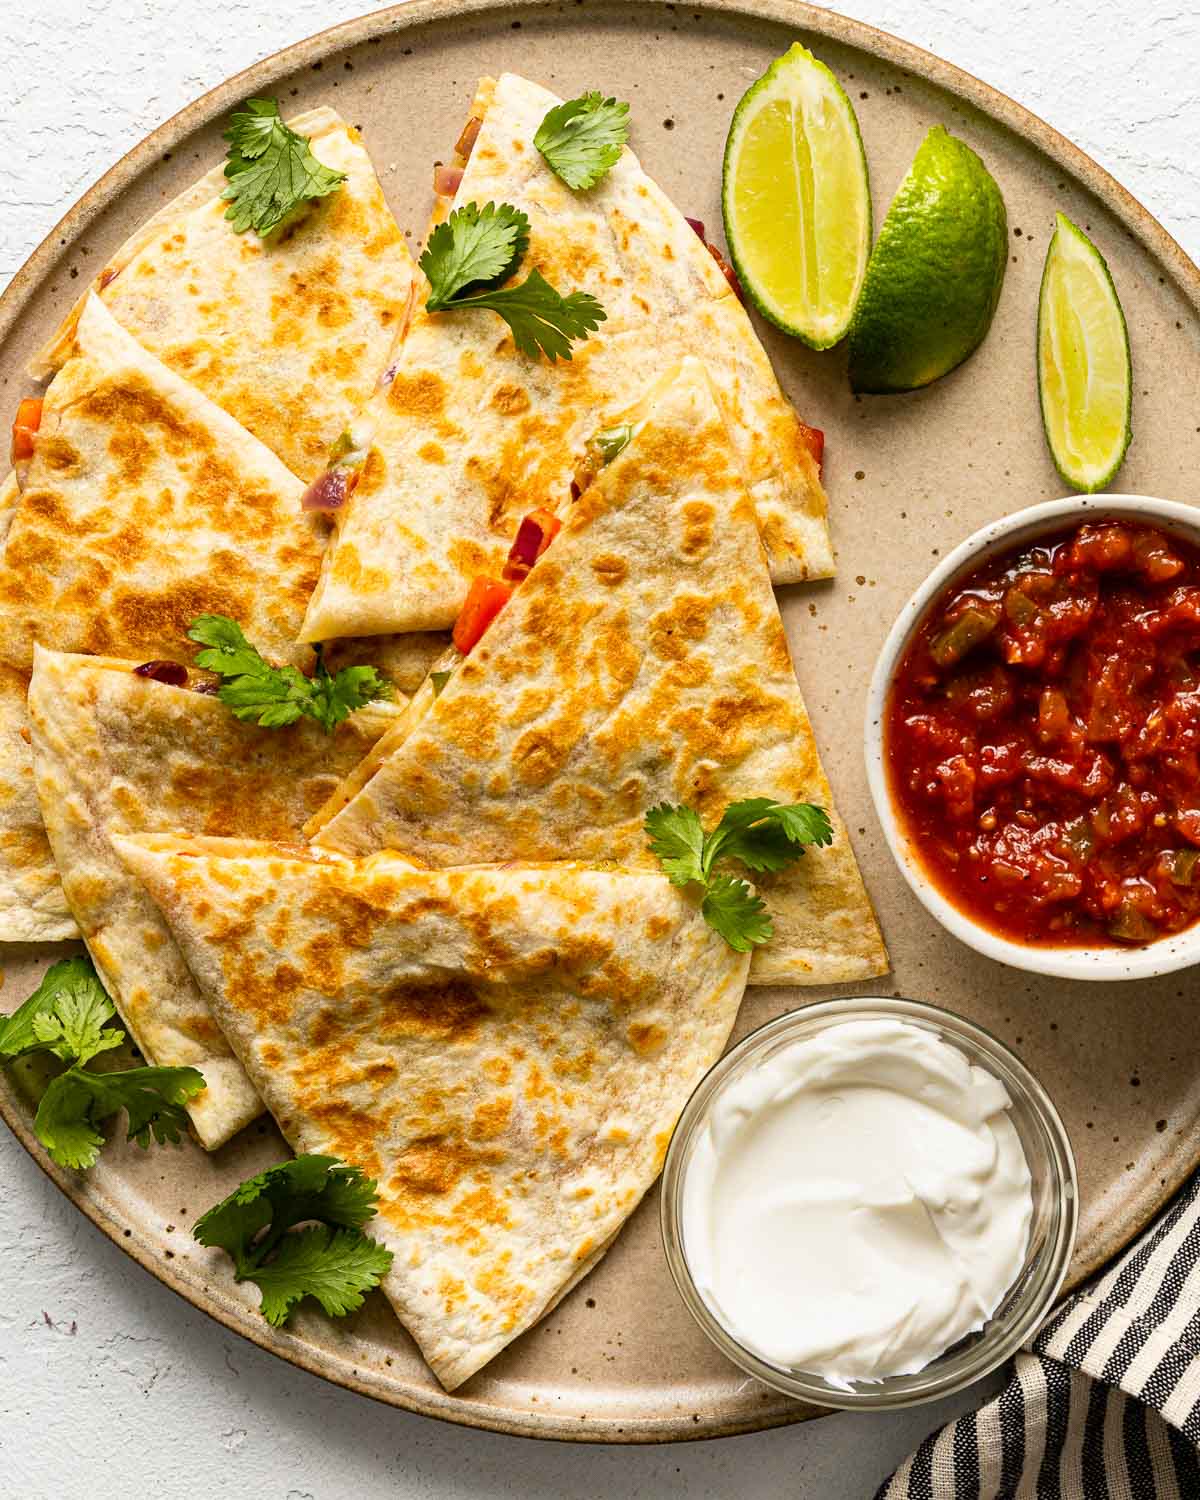 a large plate with cheese quesadillas, sour cream, salsa, and limes.